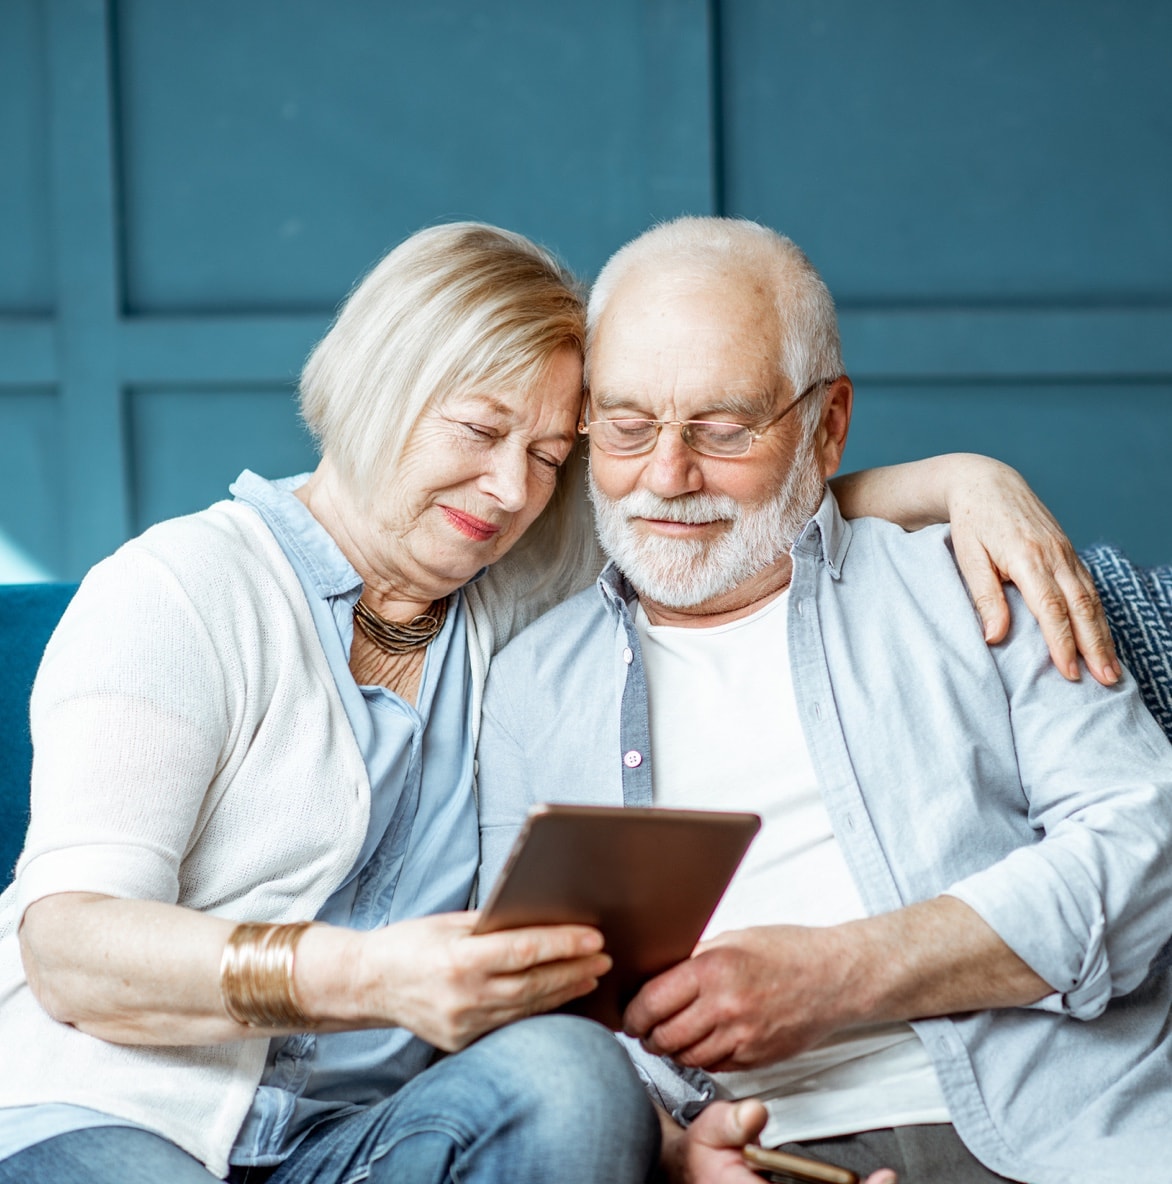 Mature couple looks at tablet screen